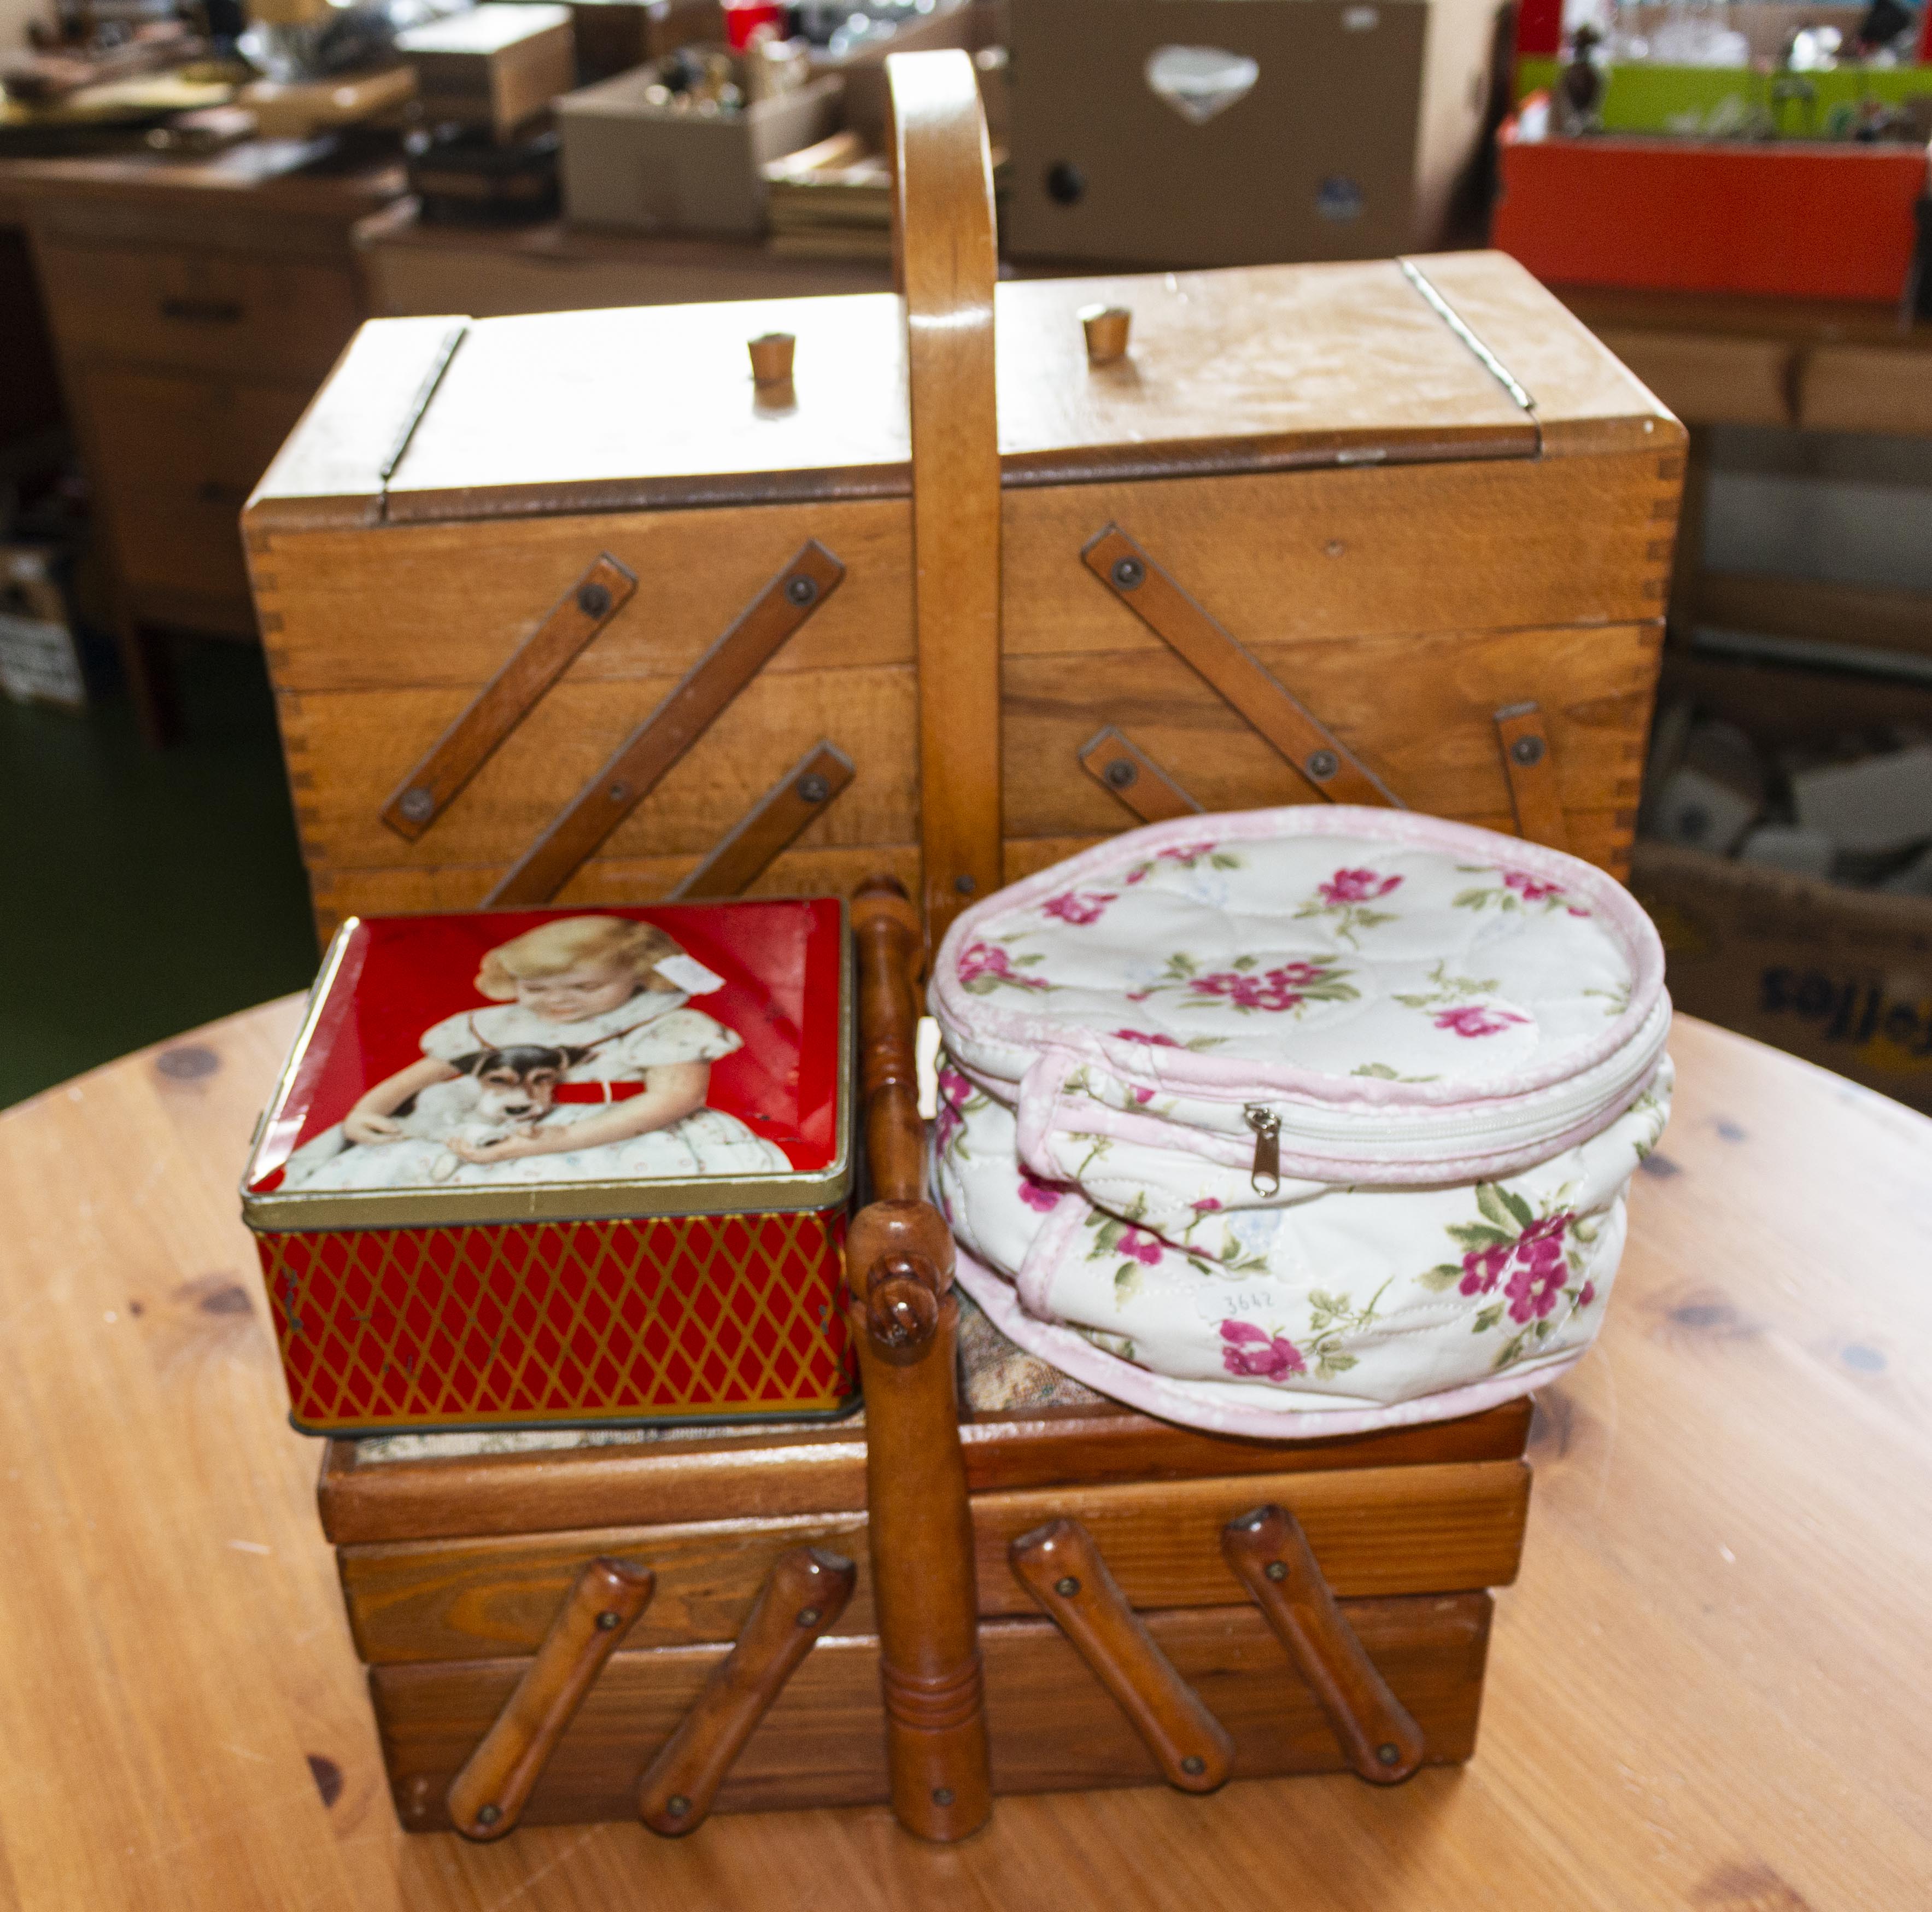 Two sewing boxes and two others